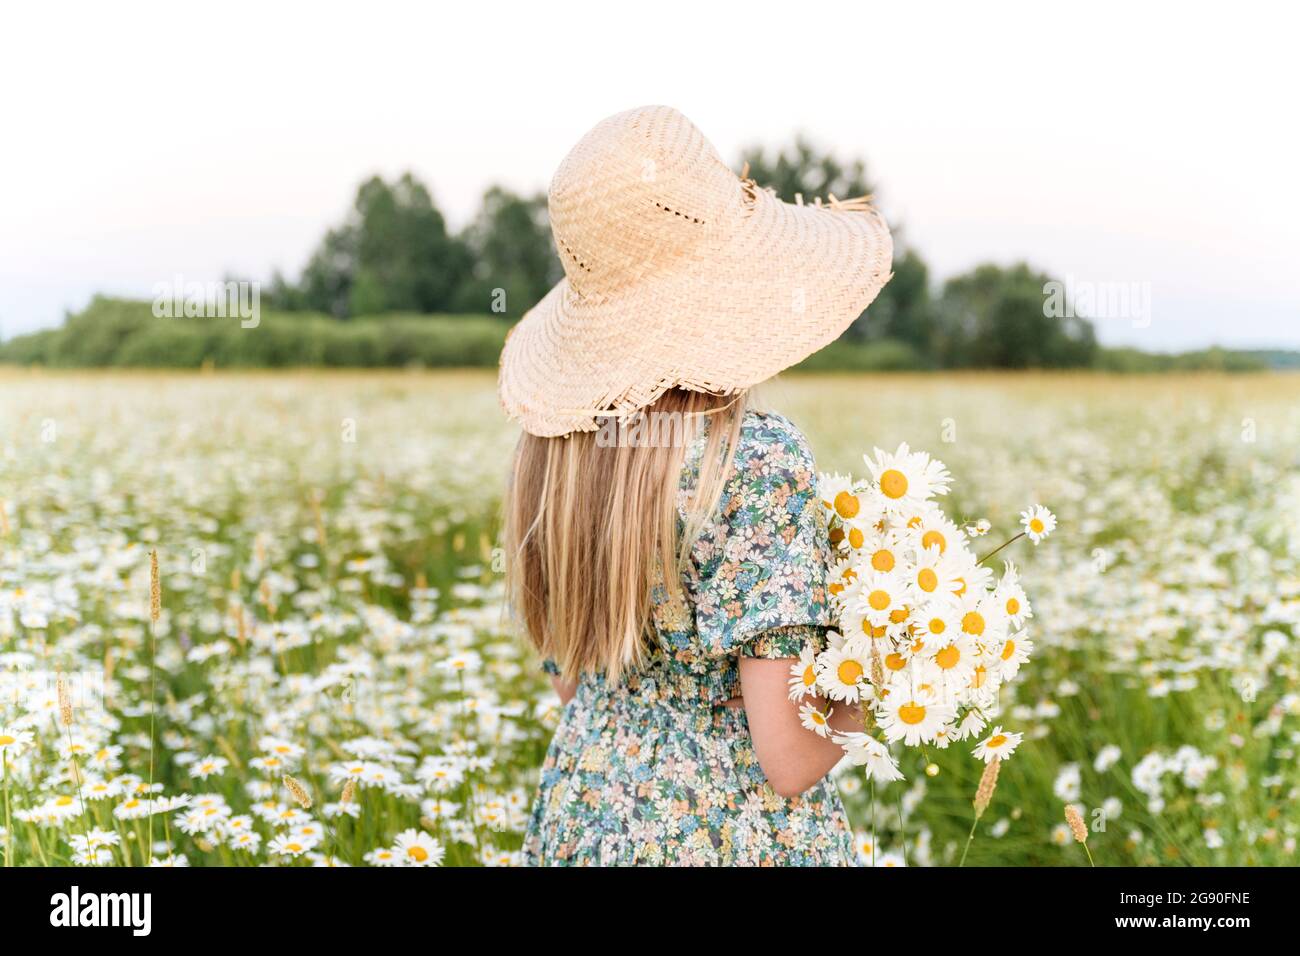 https://c8.alamy.com/comp/2G90FNE/girl-with-hat-holding-chamomile-flowers-while-standing-in-field-2G90FNE.jpg